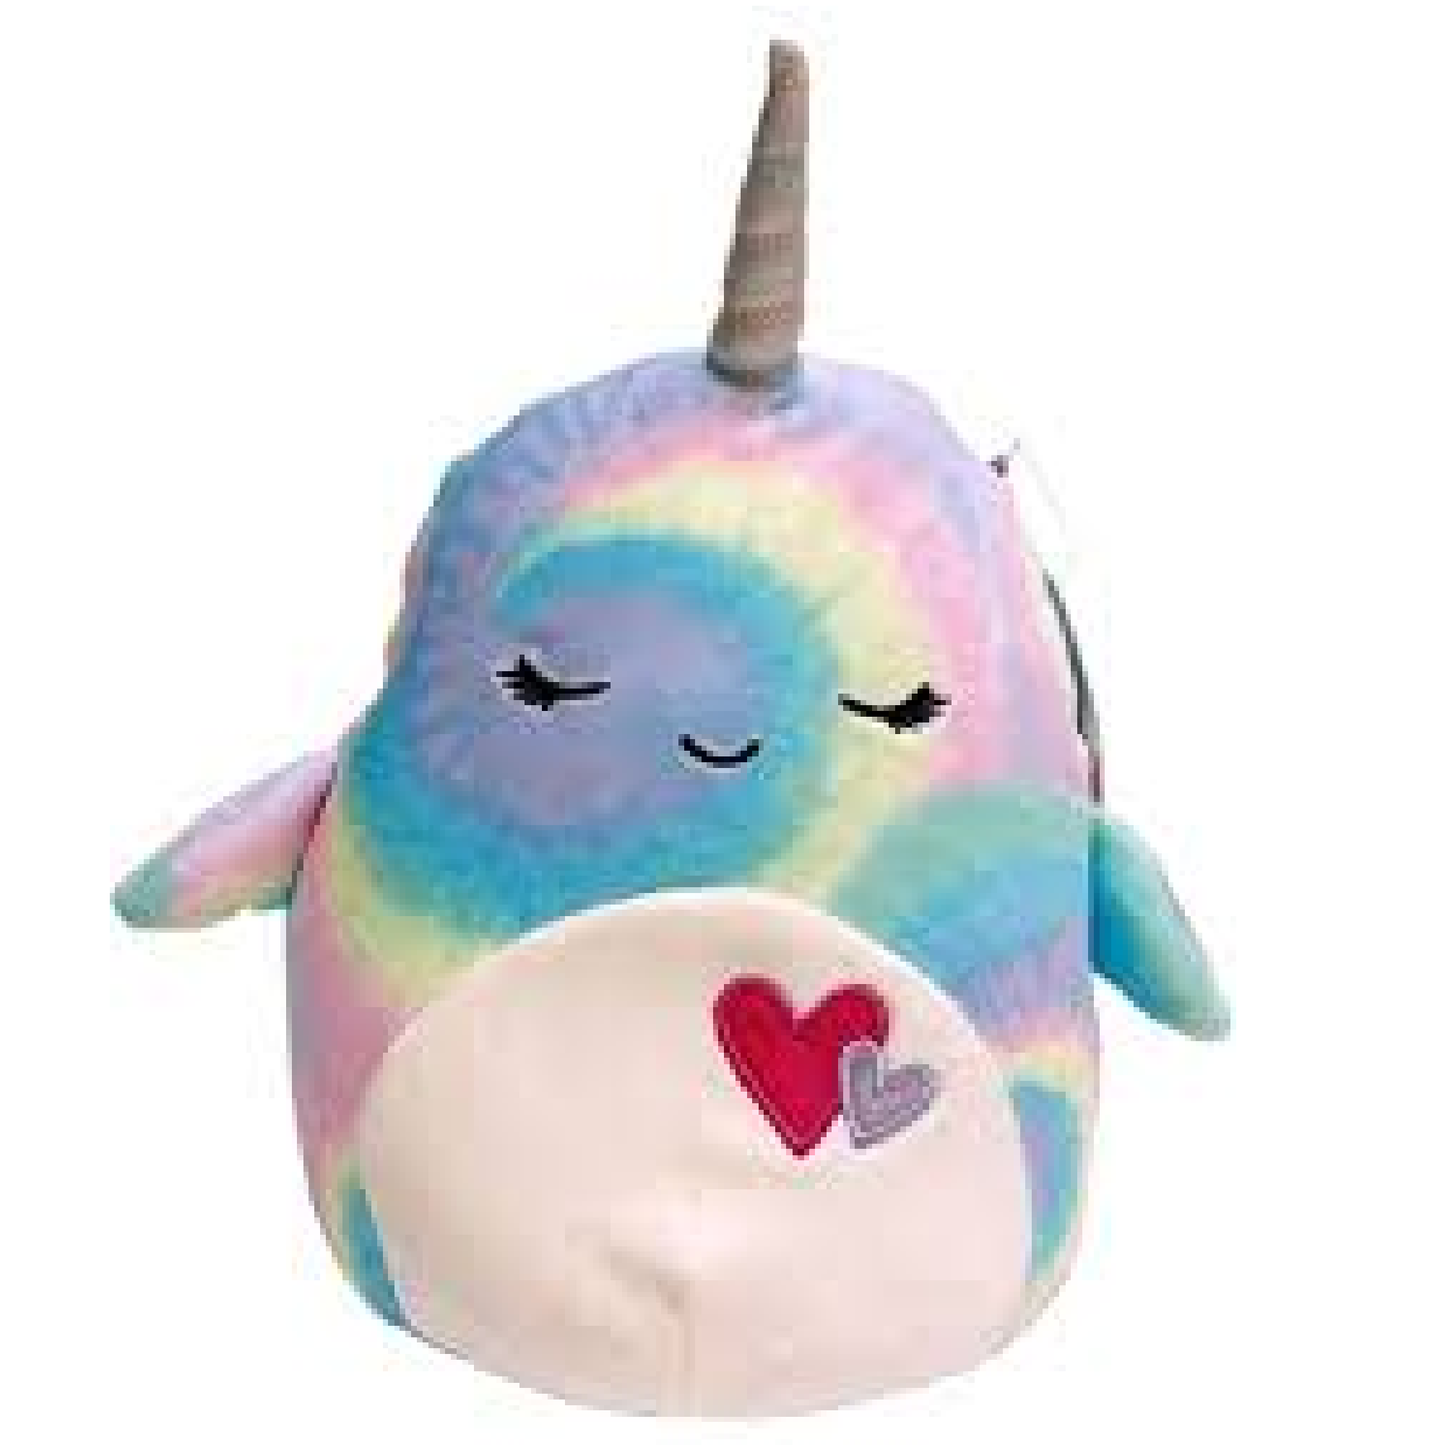 Squishmallows Valentine Squad Ter the Narwhal 12"